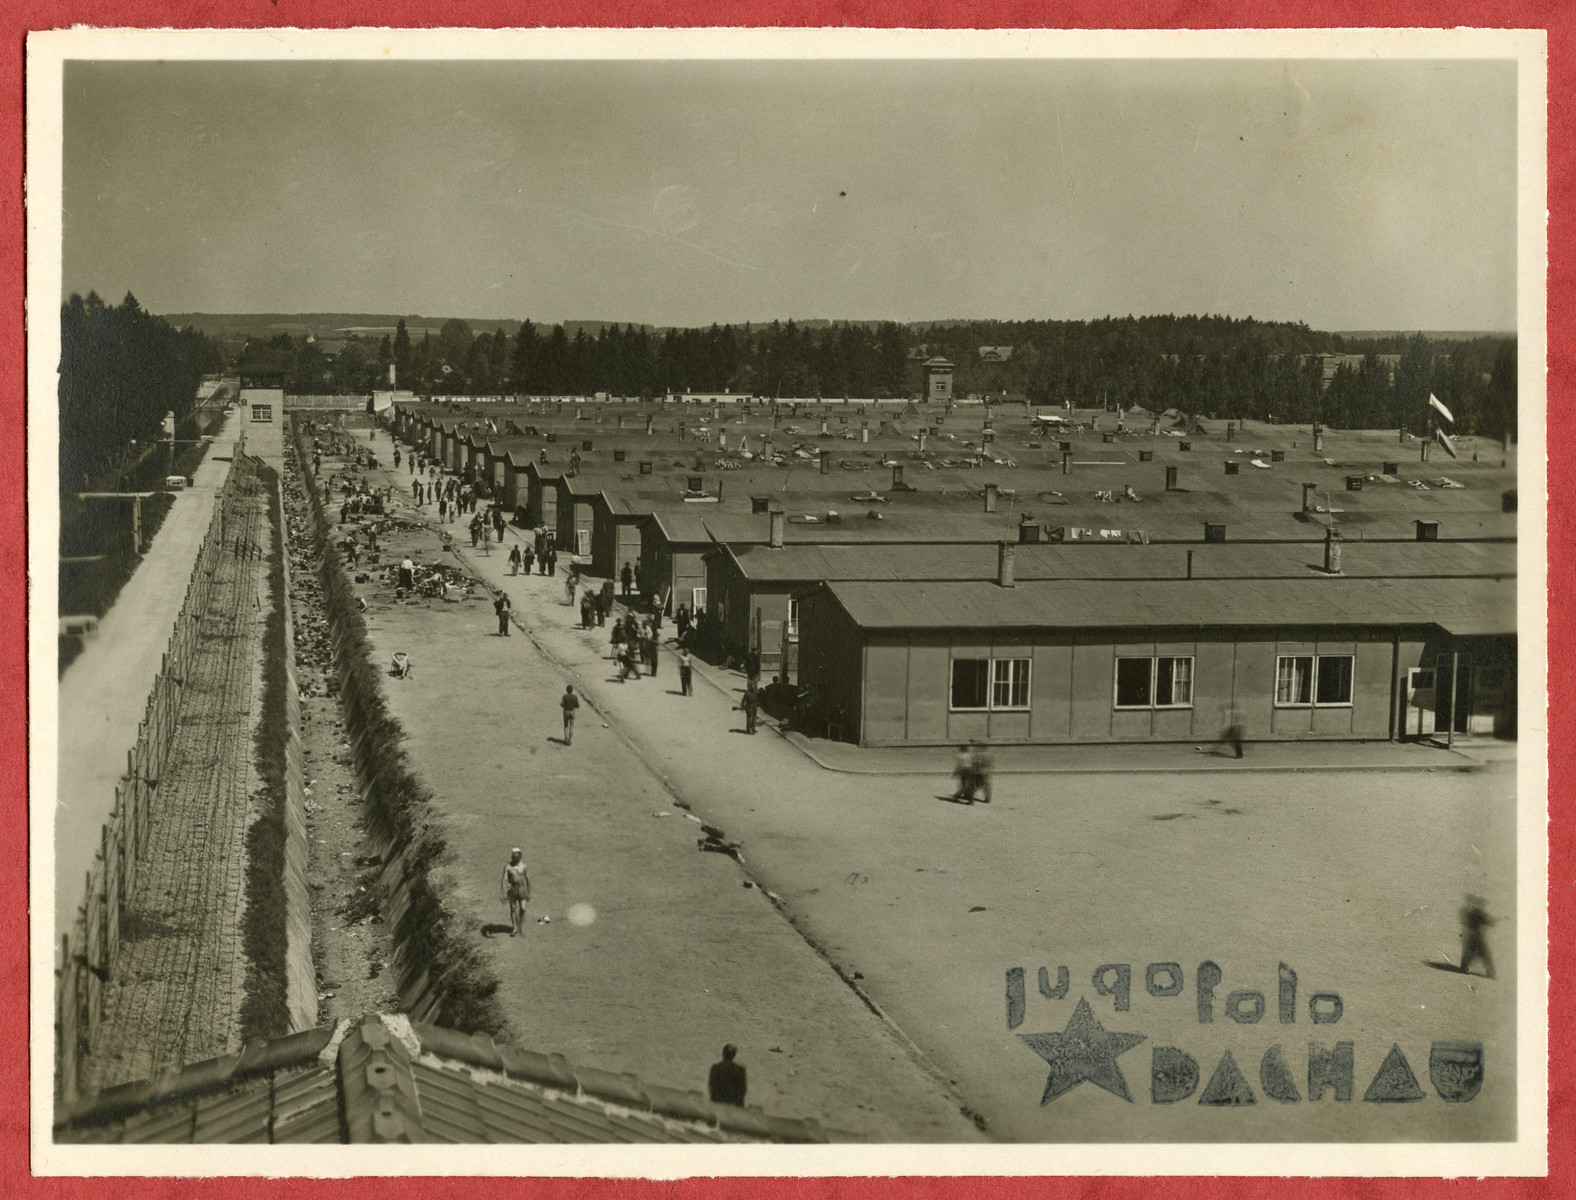 Photograph showing a view of the Dachau concentration camp pasted into an album presented to Lt. Col. Martin Joyce by the Yugoslav prisoner committee.